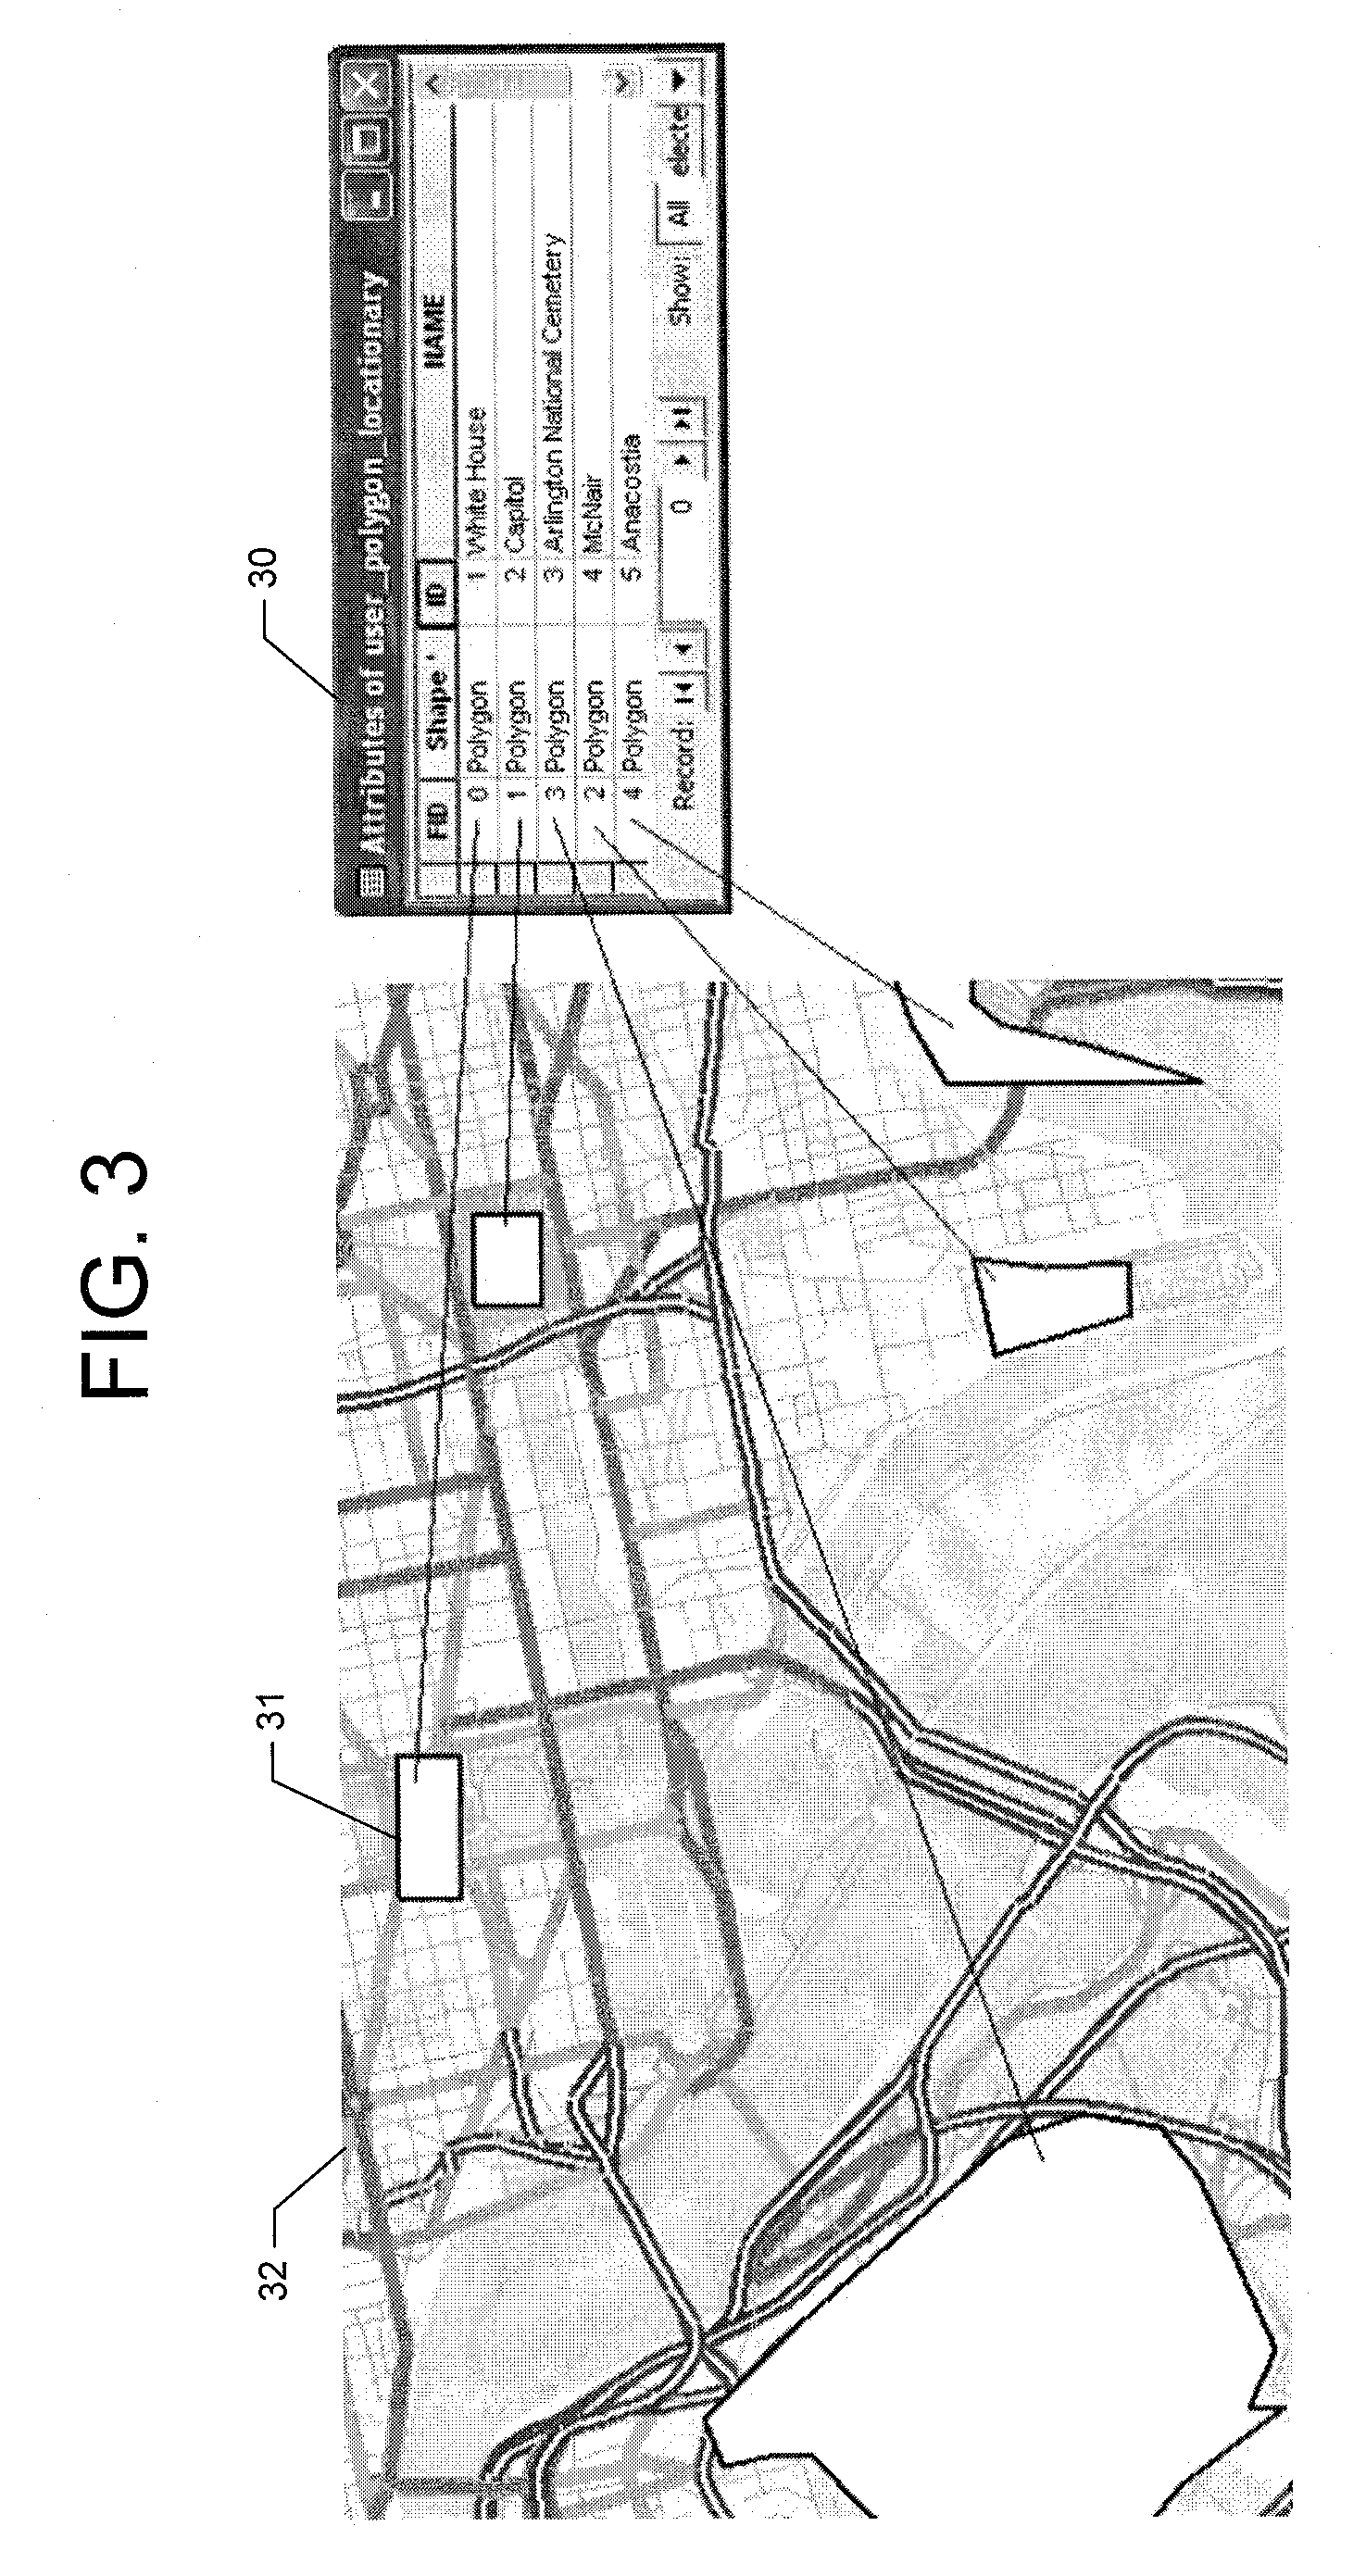 Method for Spell-Checking Location-Bound Words Within a Document